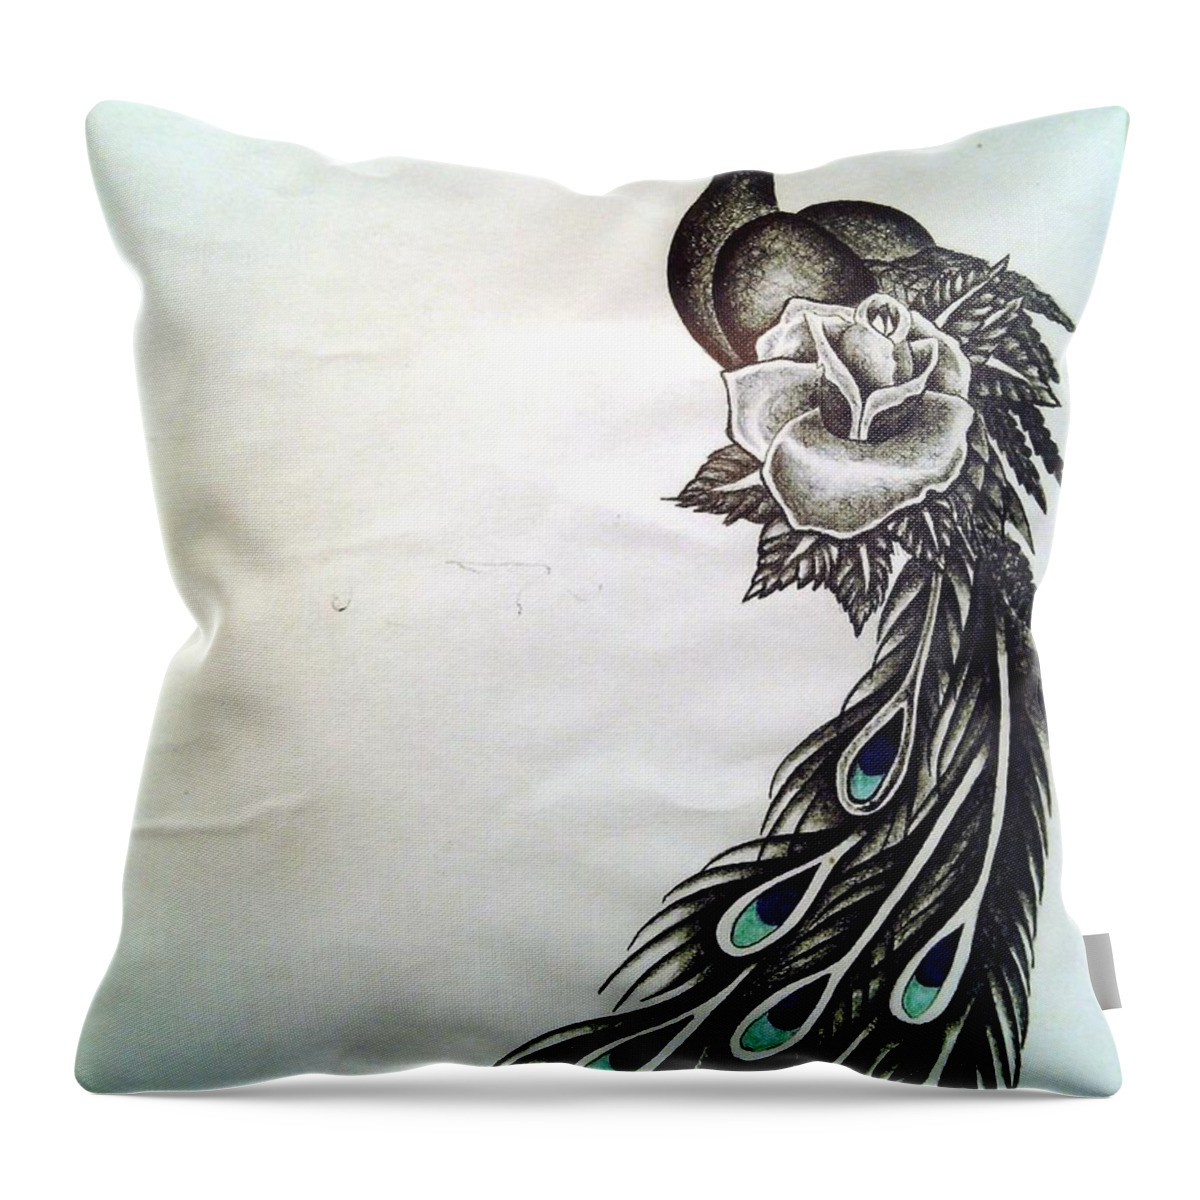 Black Art Throw Pillow featuring the drawing Untitled 14 by A S 